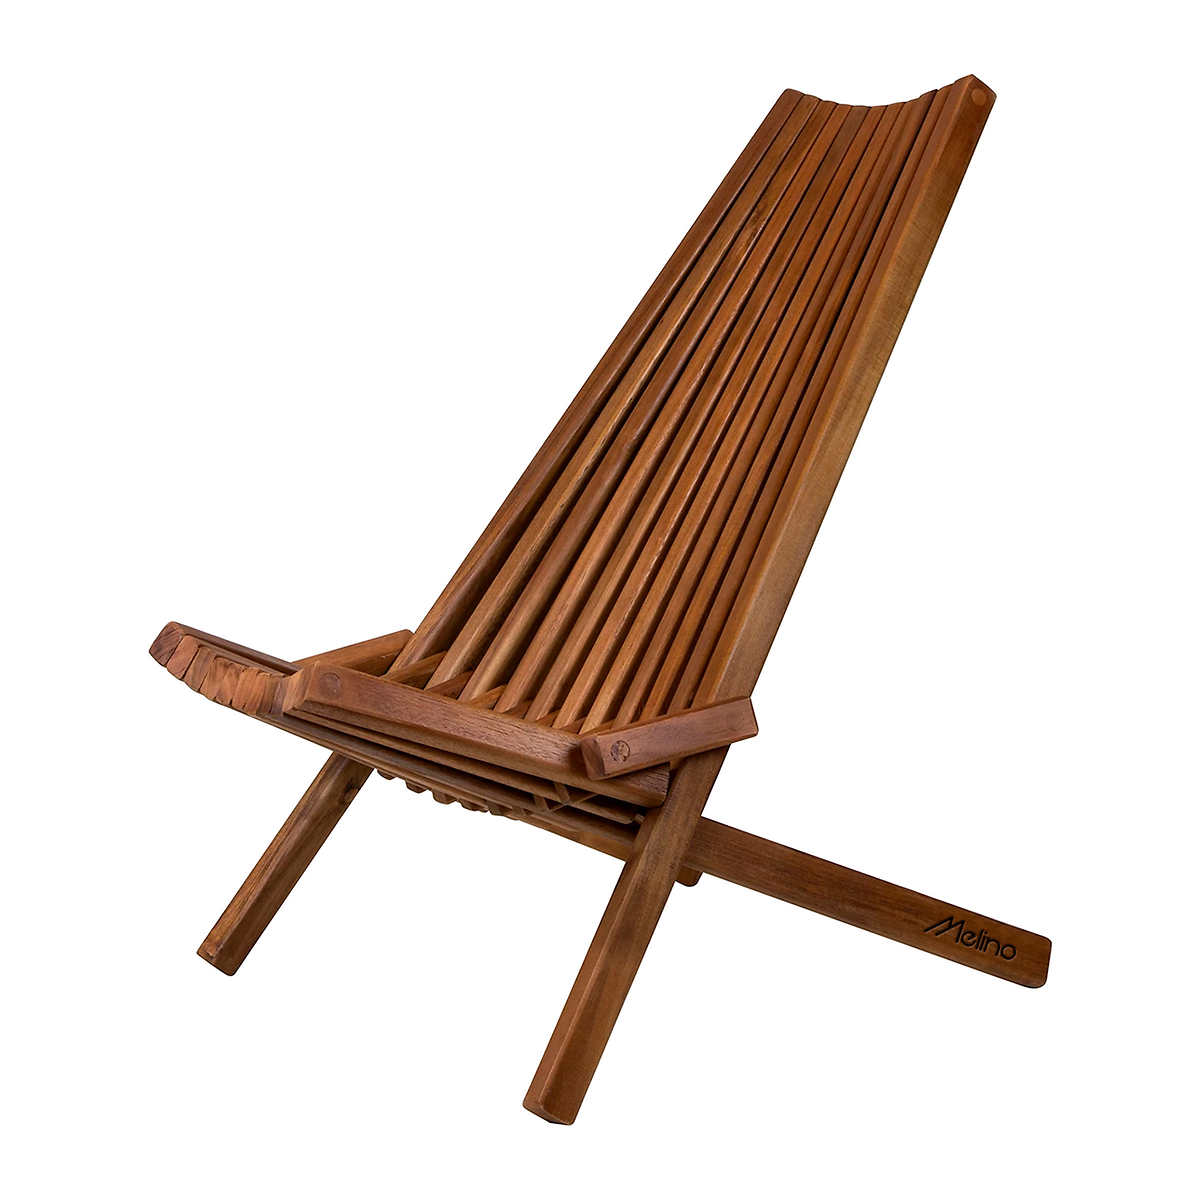 Melino Wooden Folding Chair Costco, Outdoor Foldable Chairs Costco